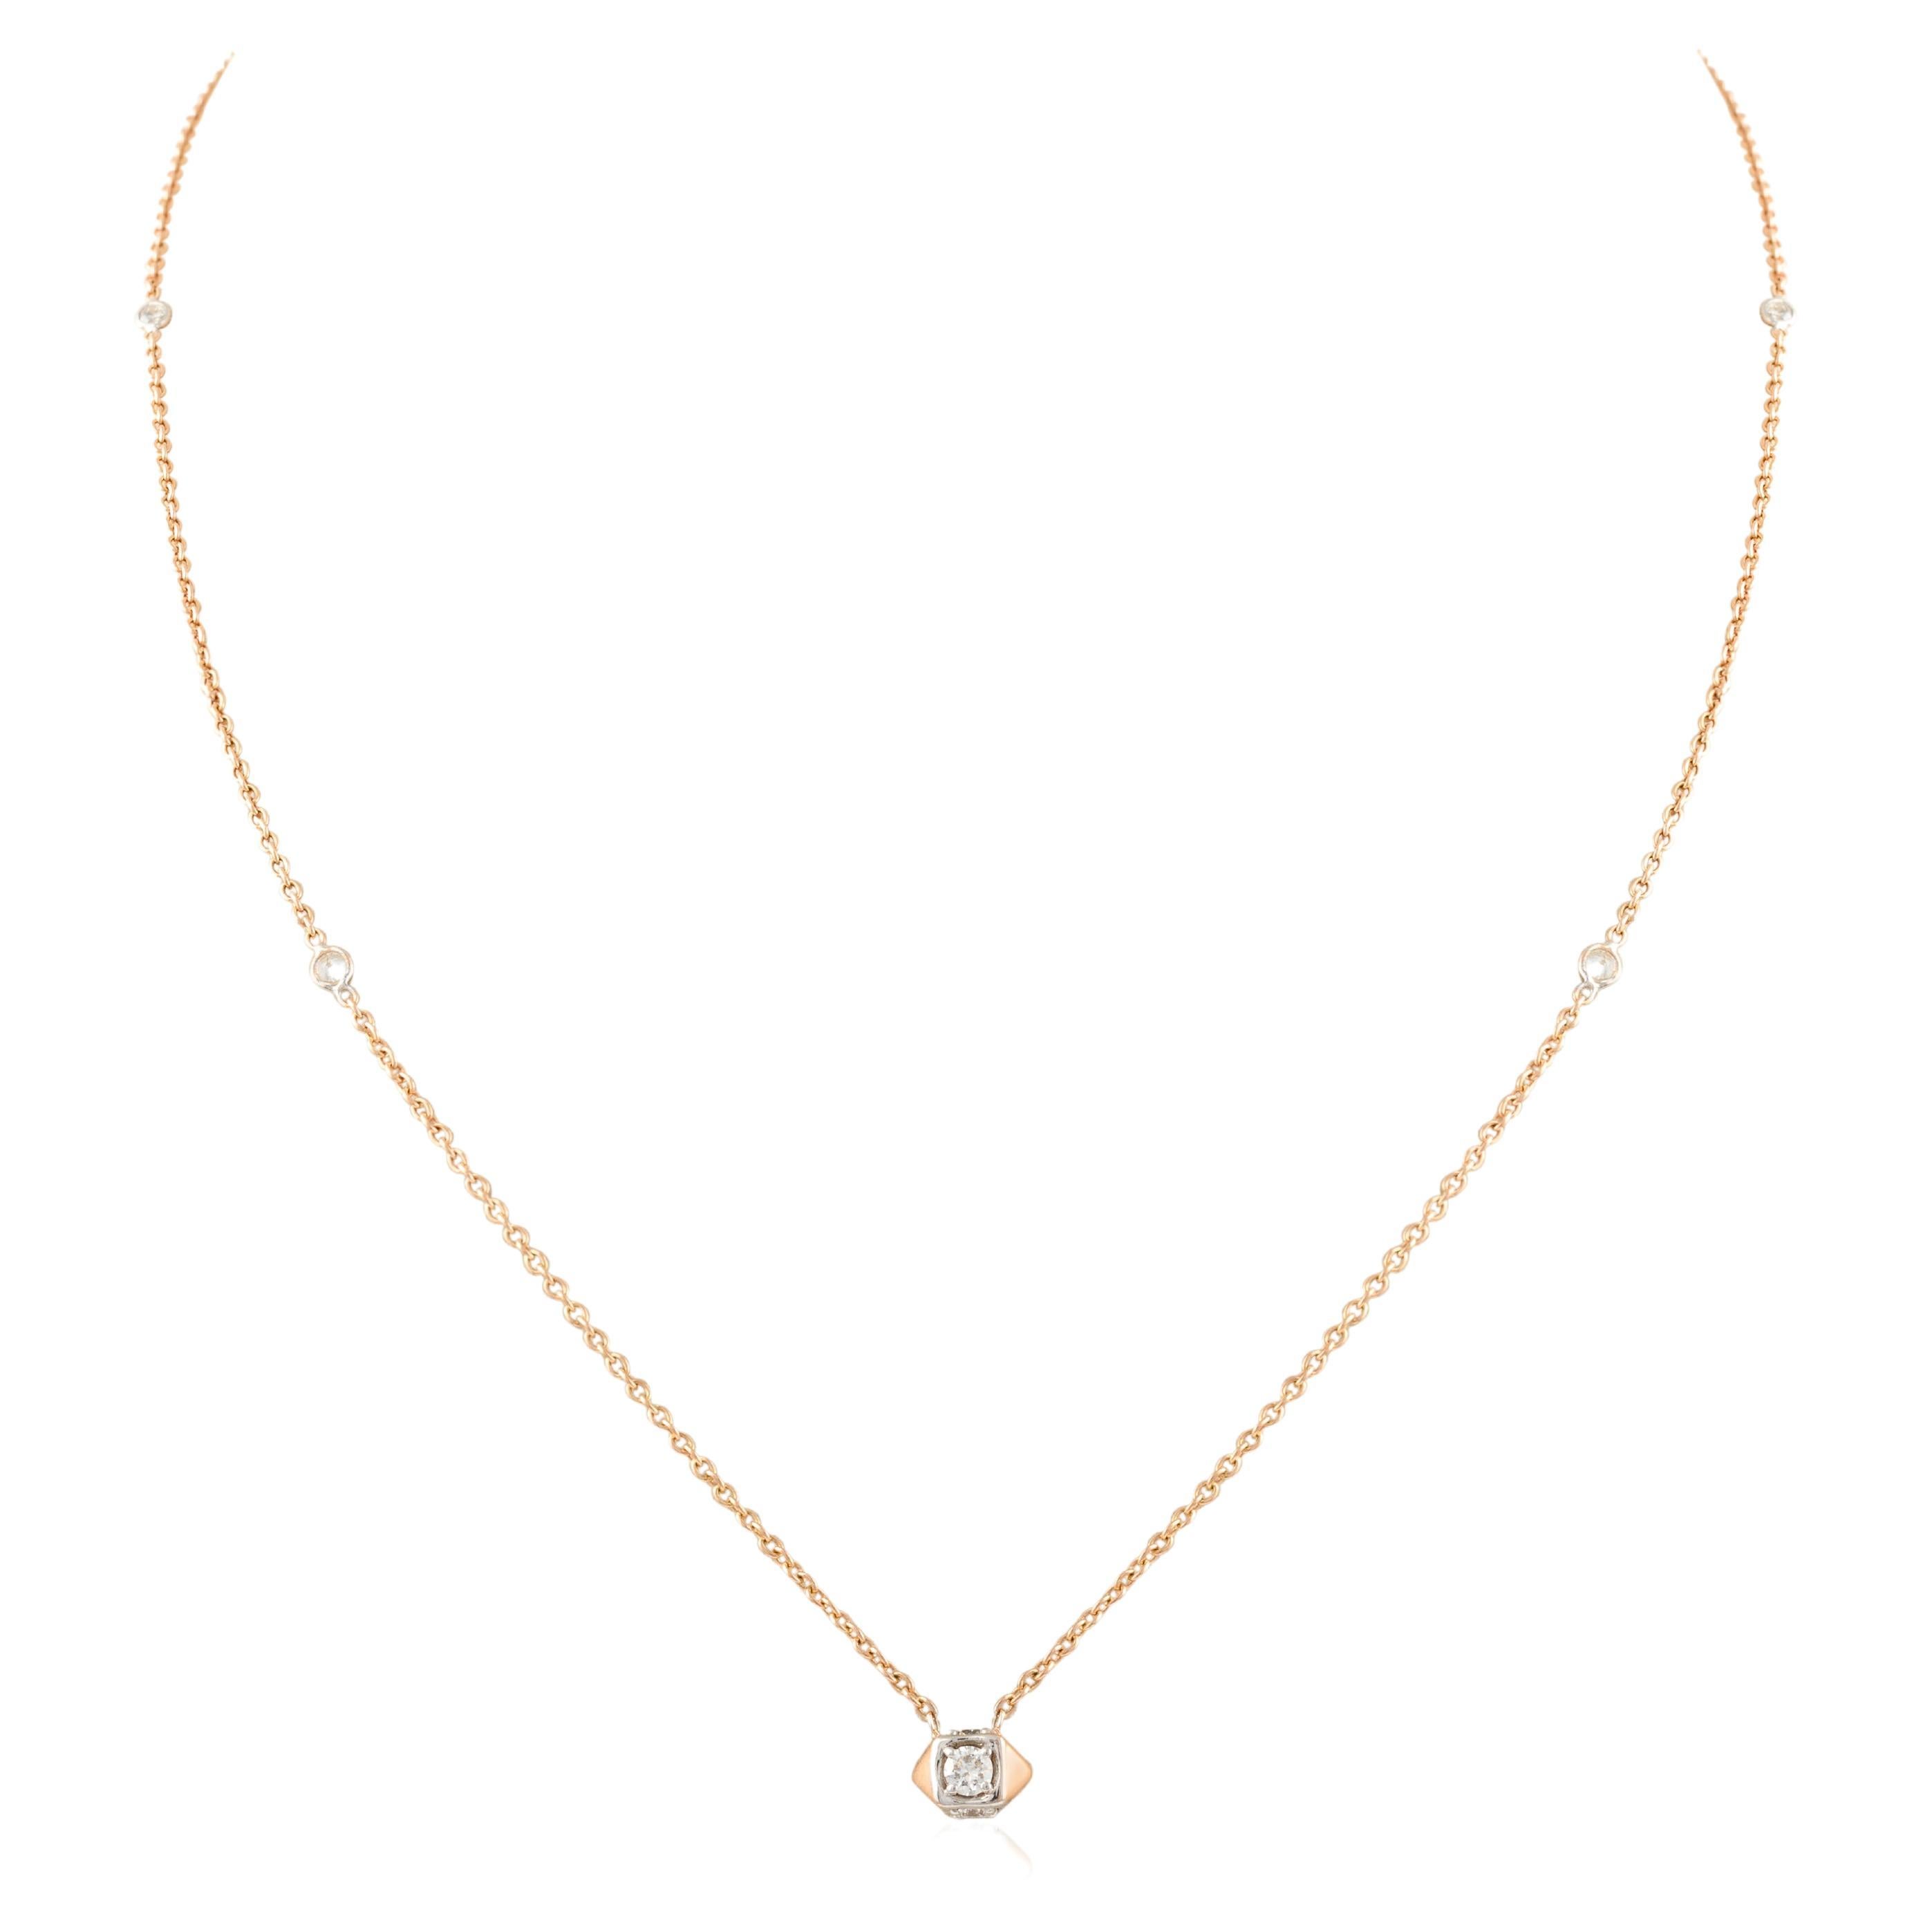 Minimalist Diamond Chain Necklace in 18k Solid Rose Gold, Thanksgiving Gift For Sale